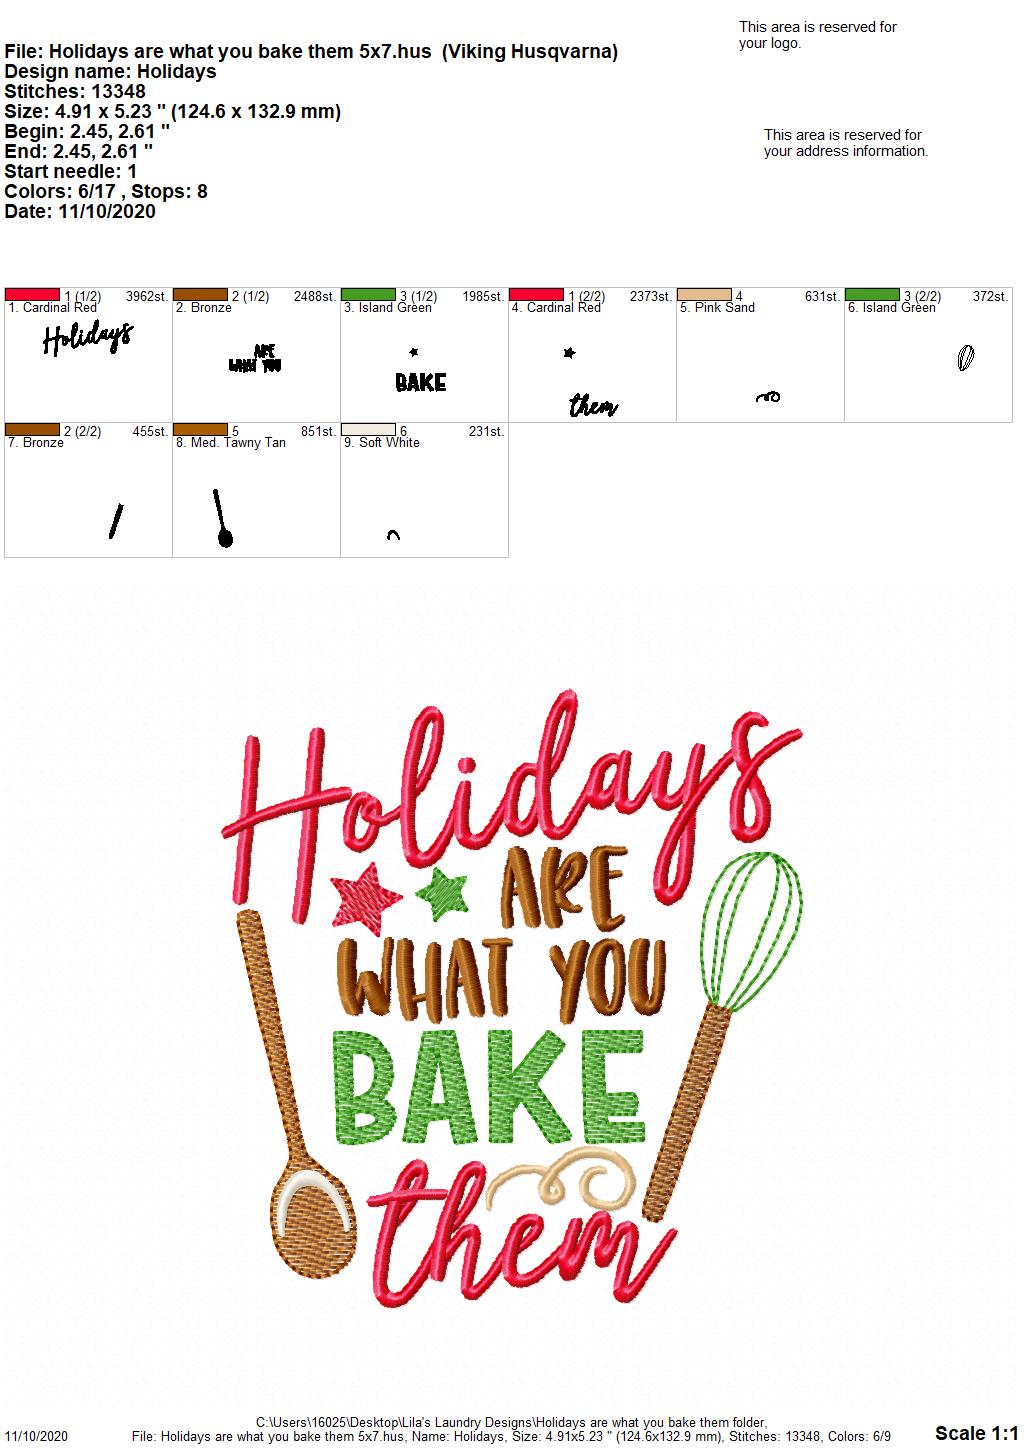 Holidays are what you bake them - 2 Sizes - Digital Embroidery Design